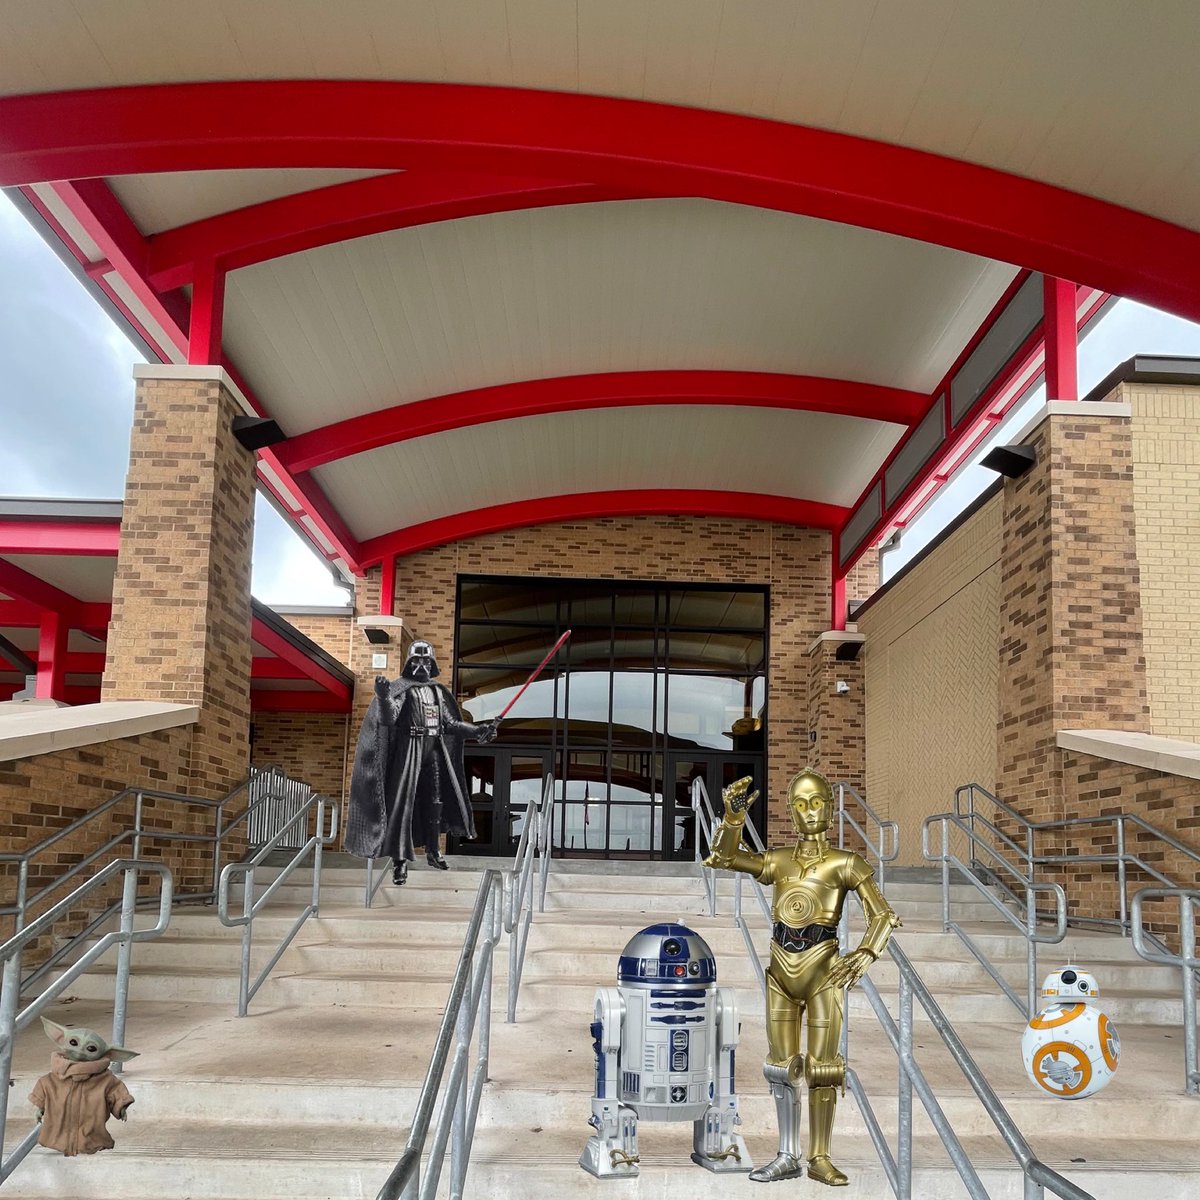 Happy Star Wars Day! May the 4th be with you! #StarWarsDay2024 #RaiderPride